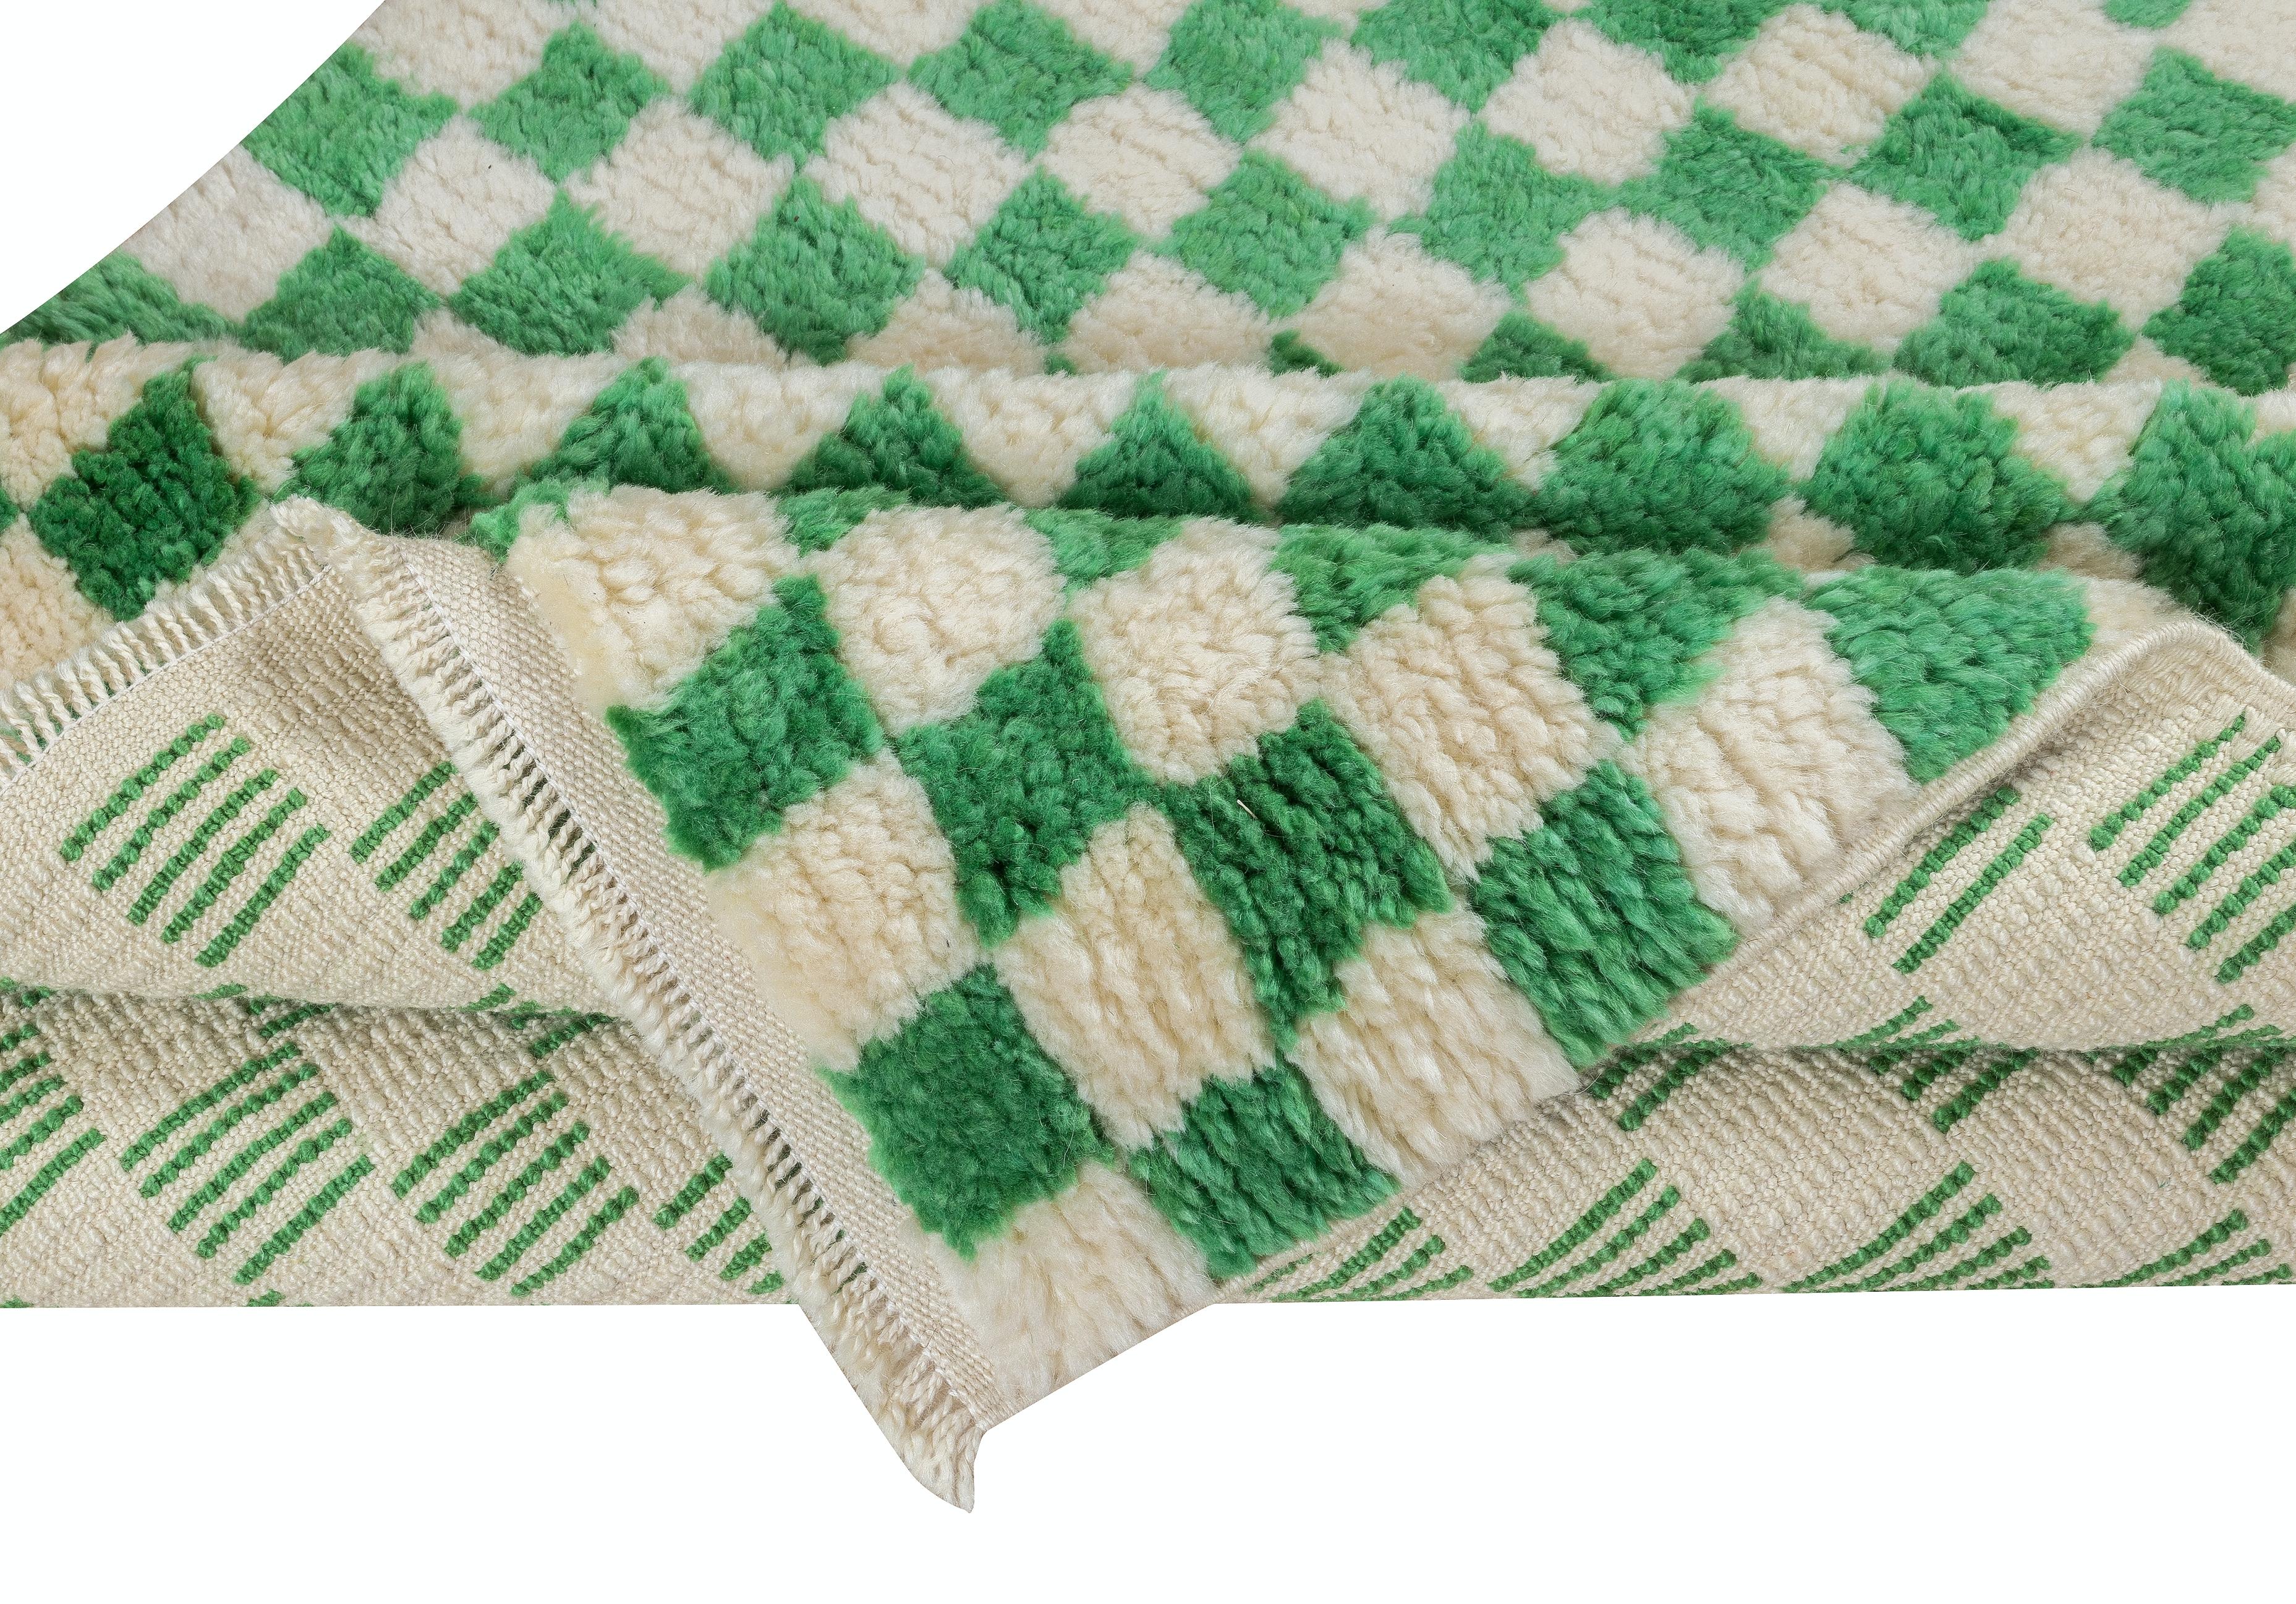 A custom, handmade Tulu rug made from 100% Hand-Spun Wool of finest quality. It features a simple checkered design in cream and radiant emerald green.

These beautiful rugs are hand-knotted in our workshop located in Central Anatolia, famous for